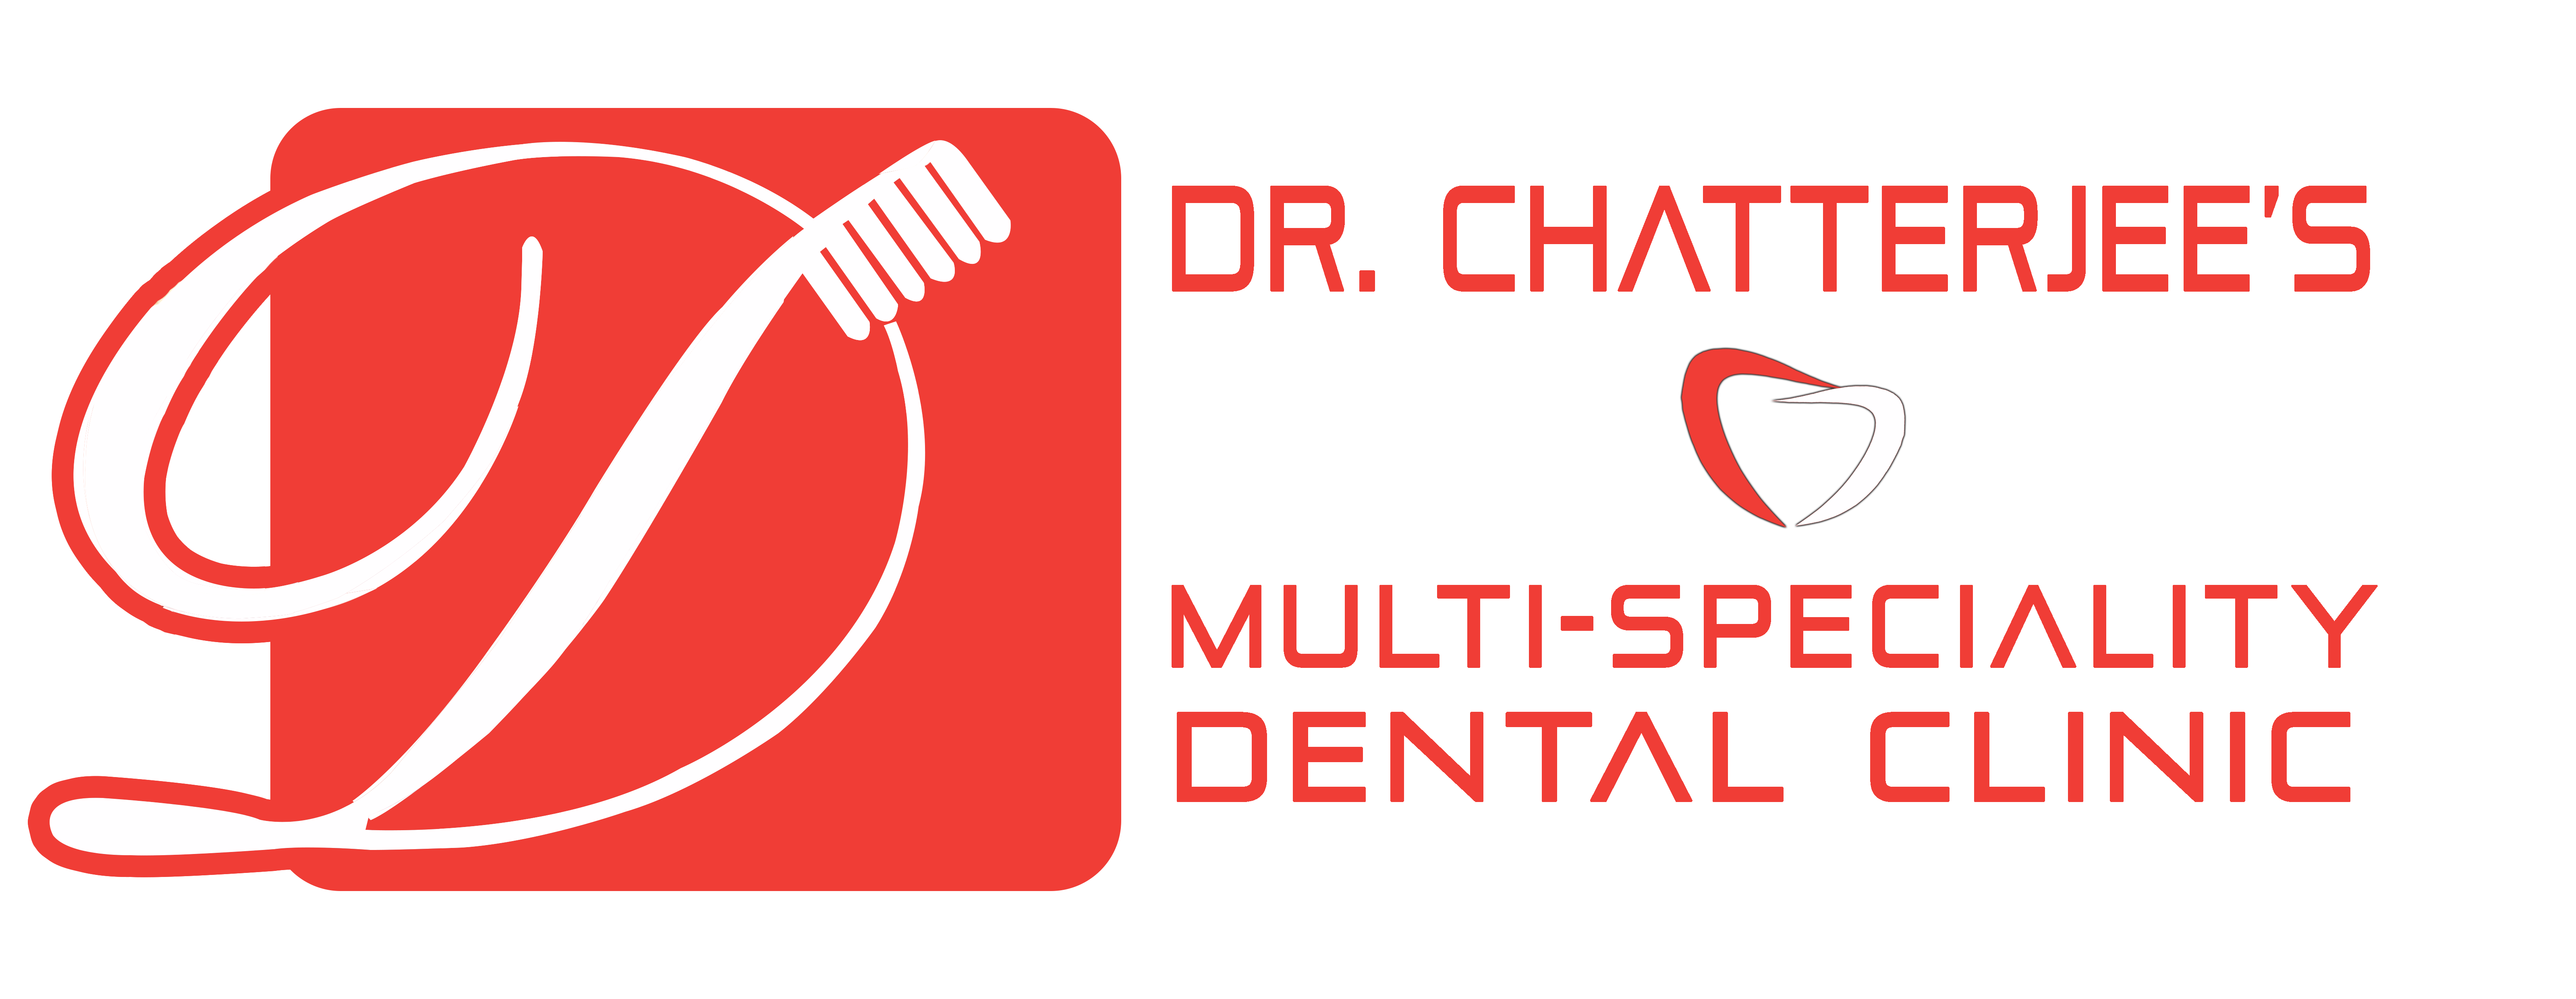 Dr Chatterjee Multispeciality Dental Clinic